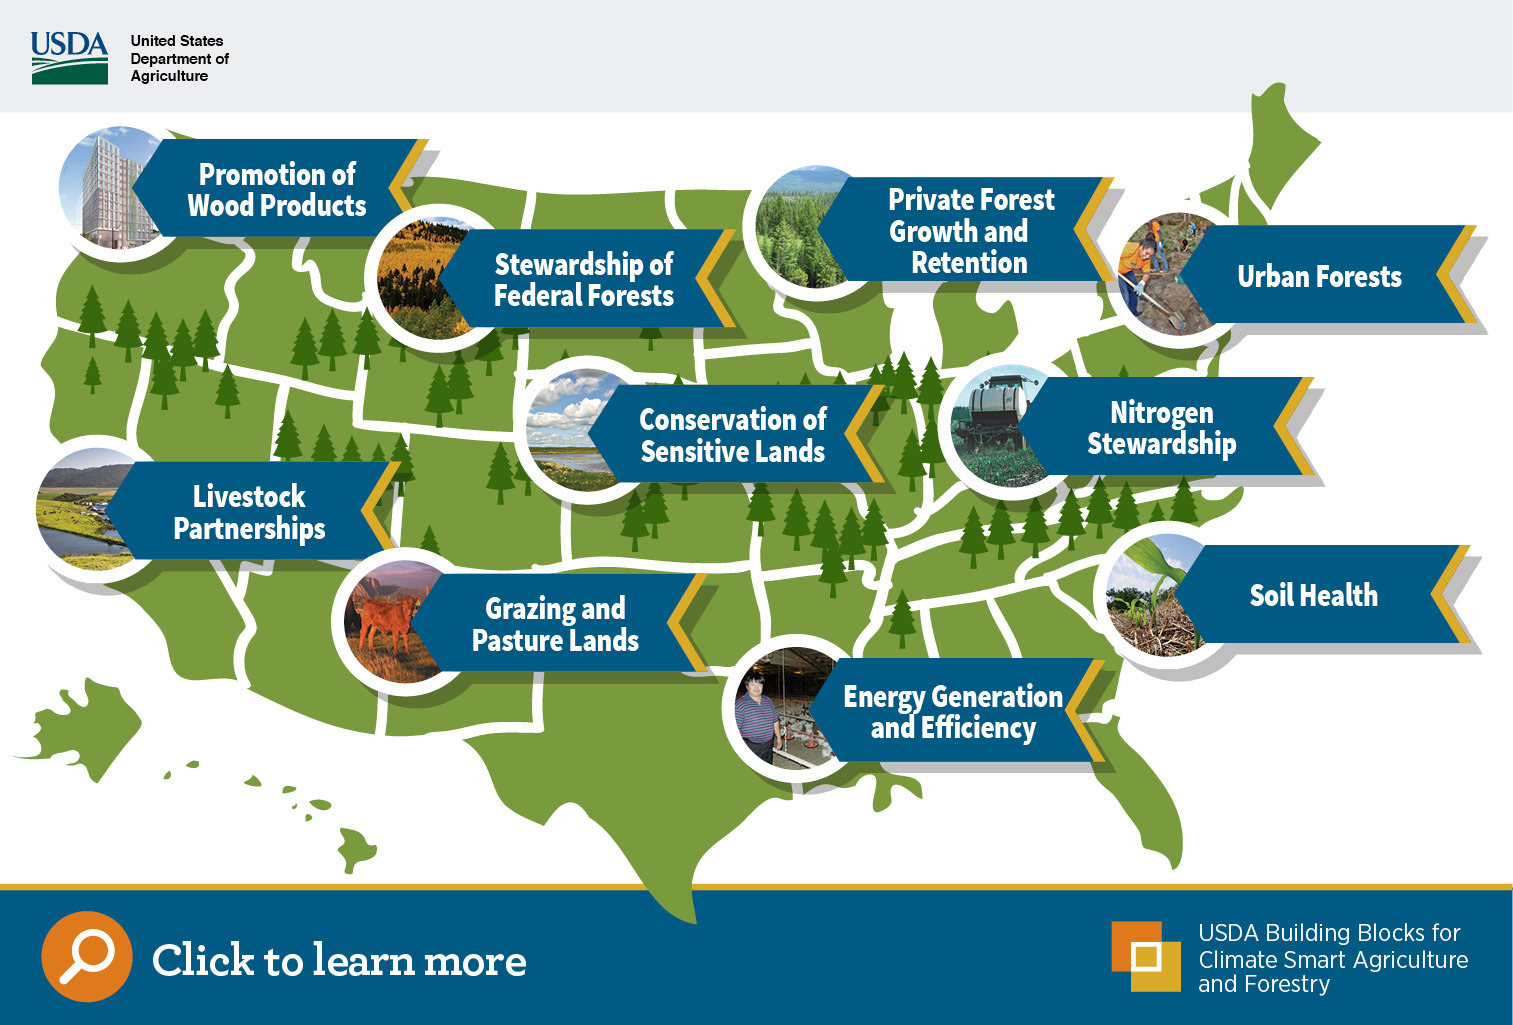 You can find out how our building blocks are working on the ground by exploring a series of case studies on our website: http://usda.gov/climate-smart